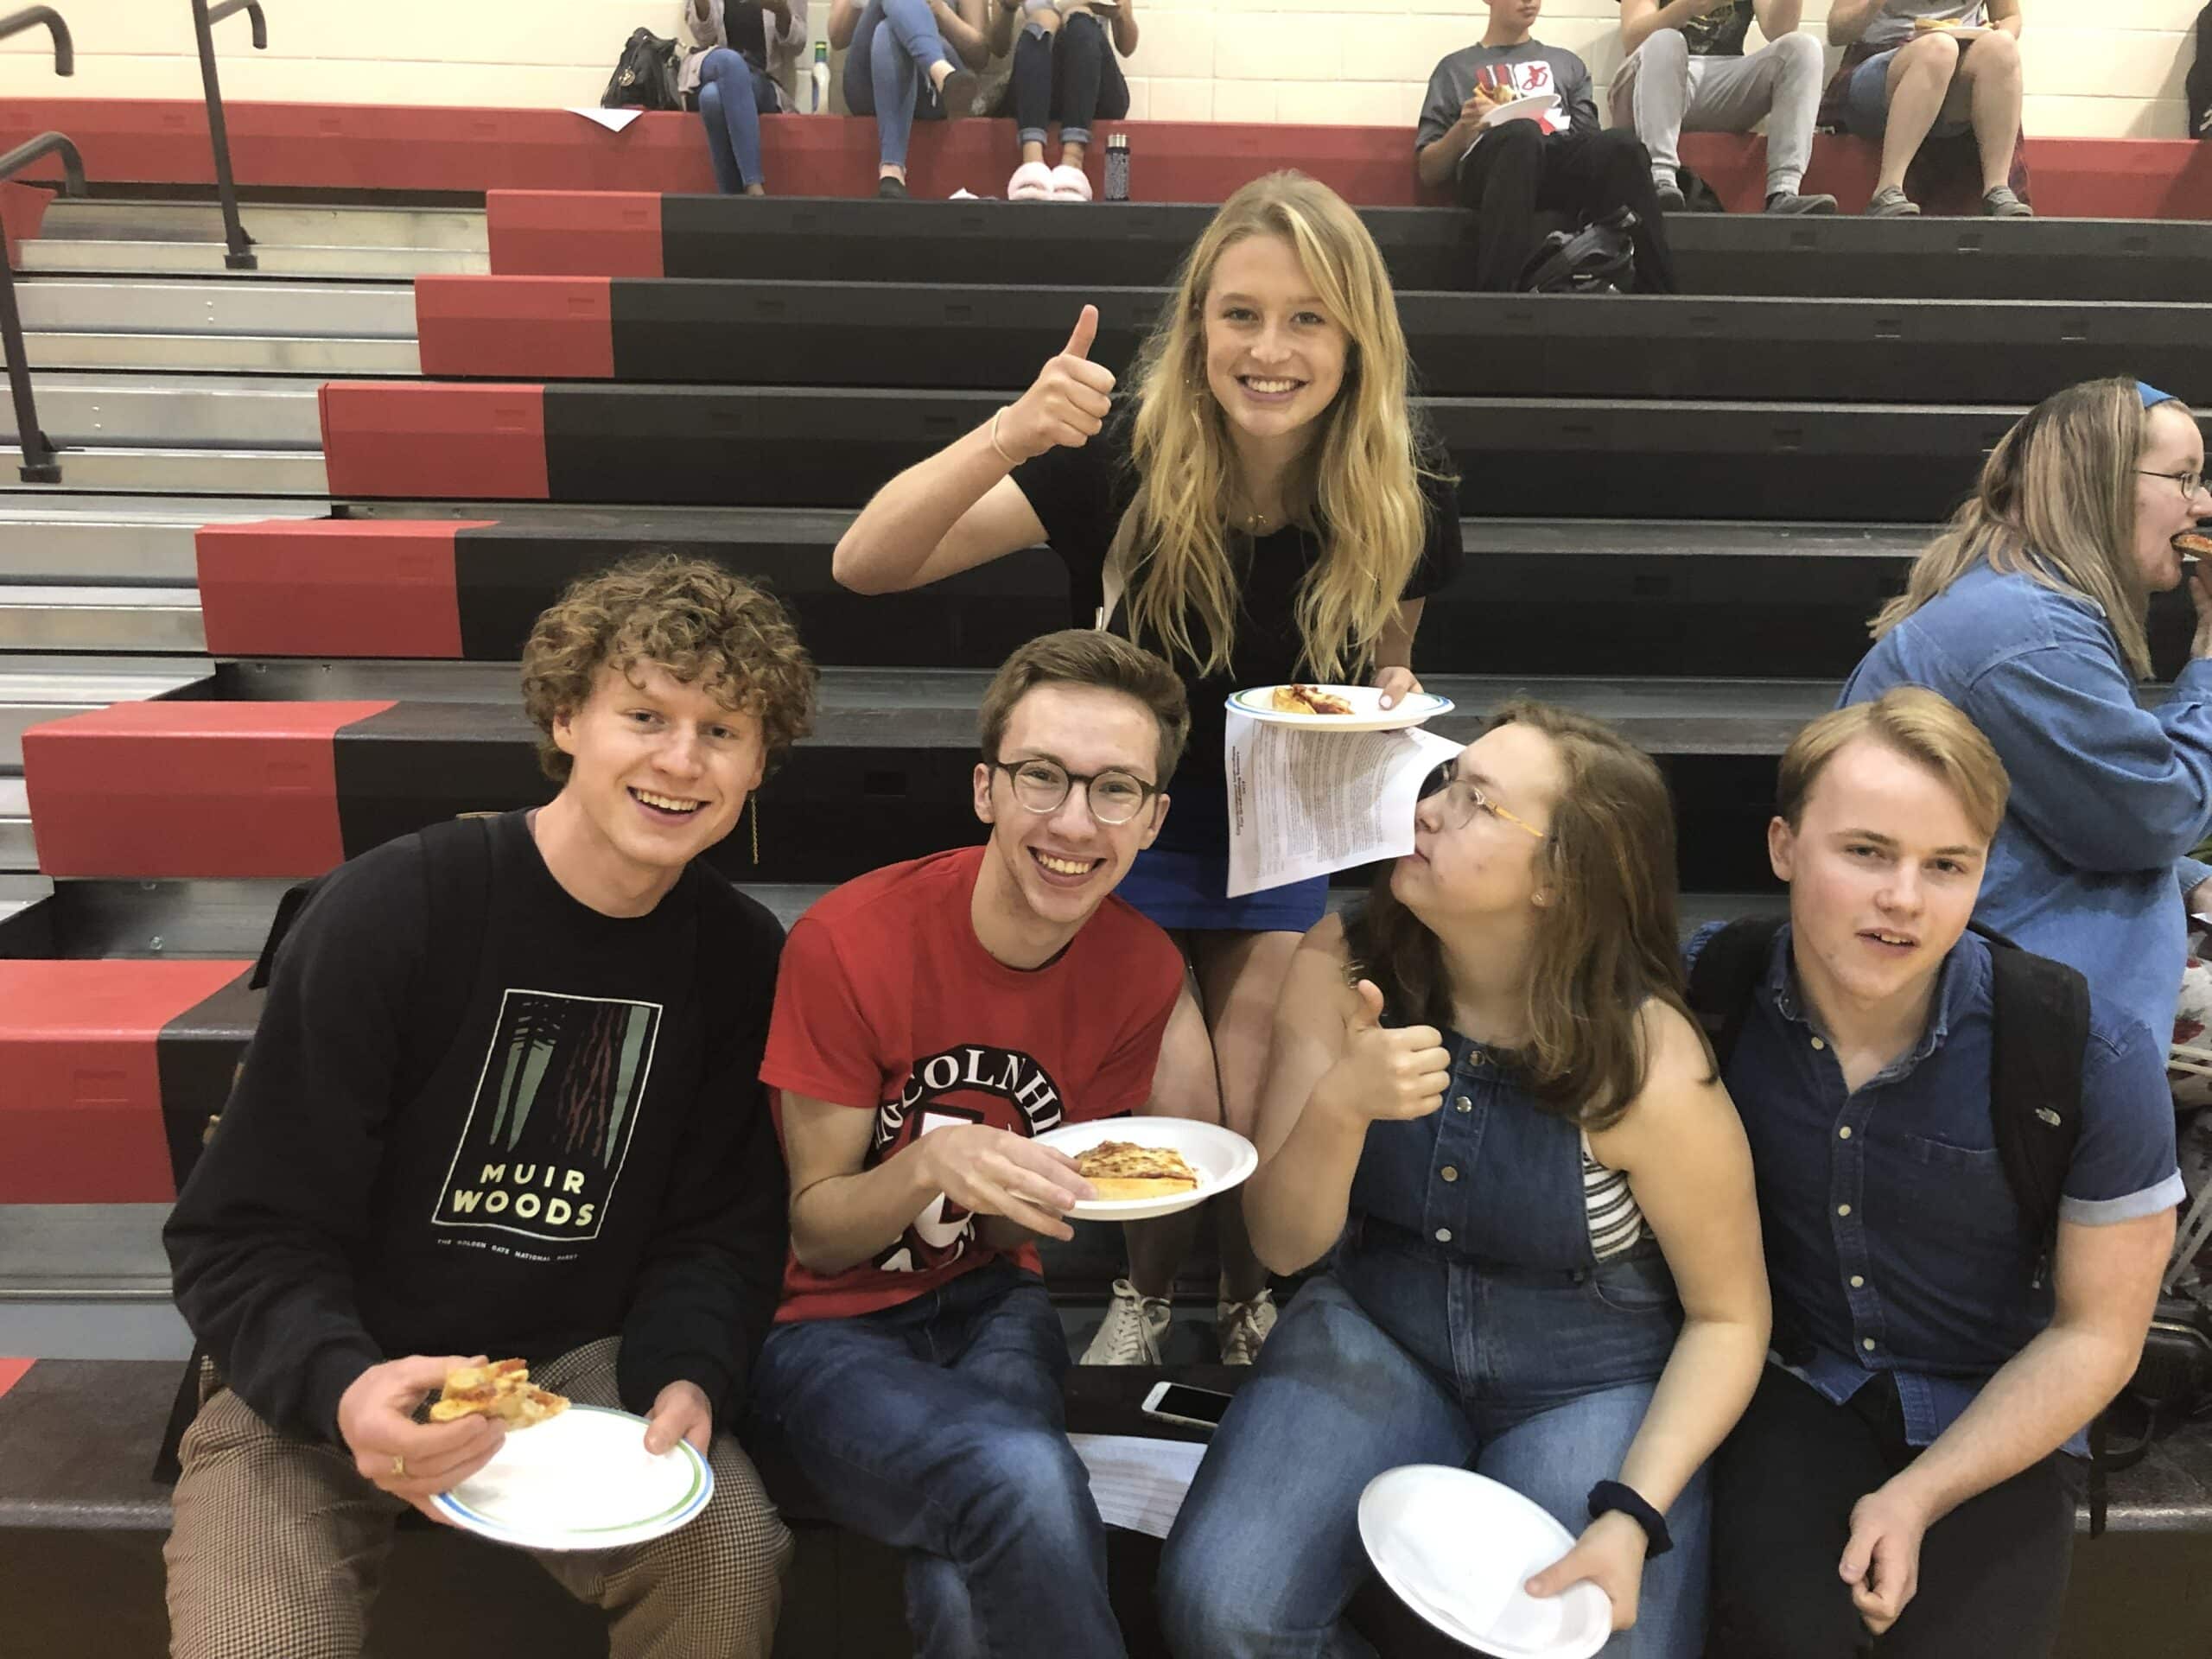 Students eating pizza